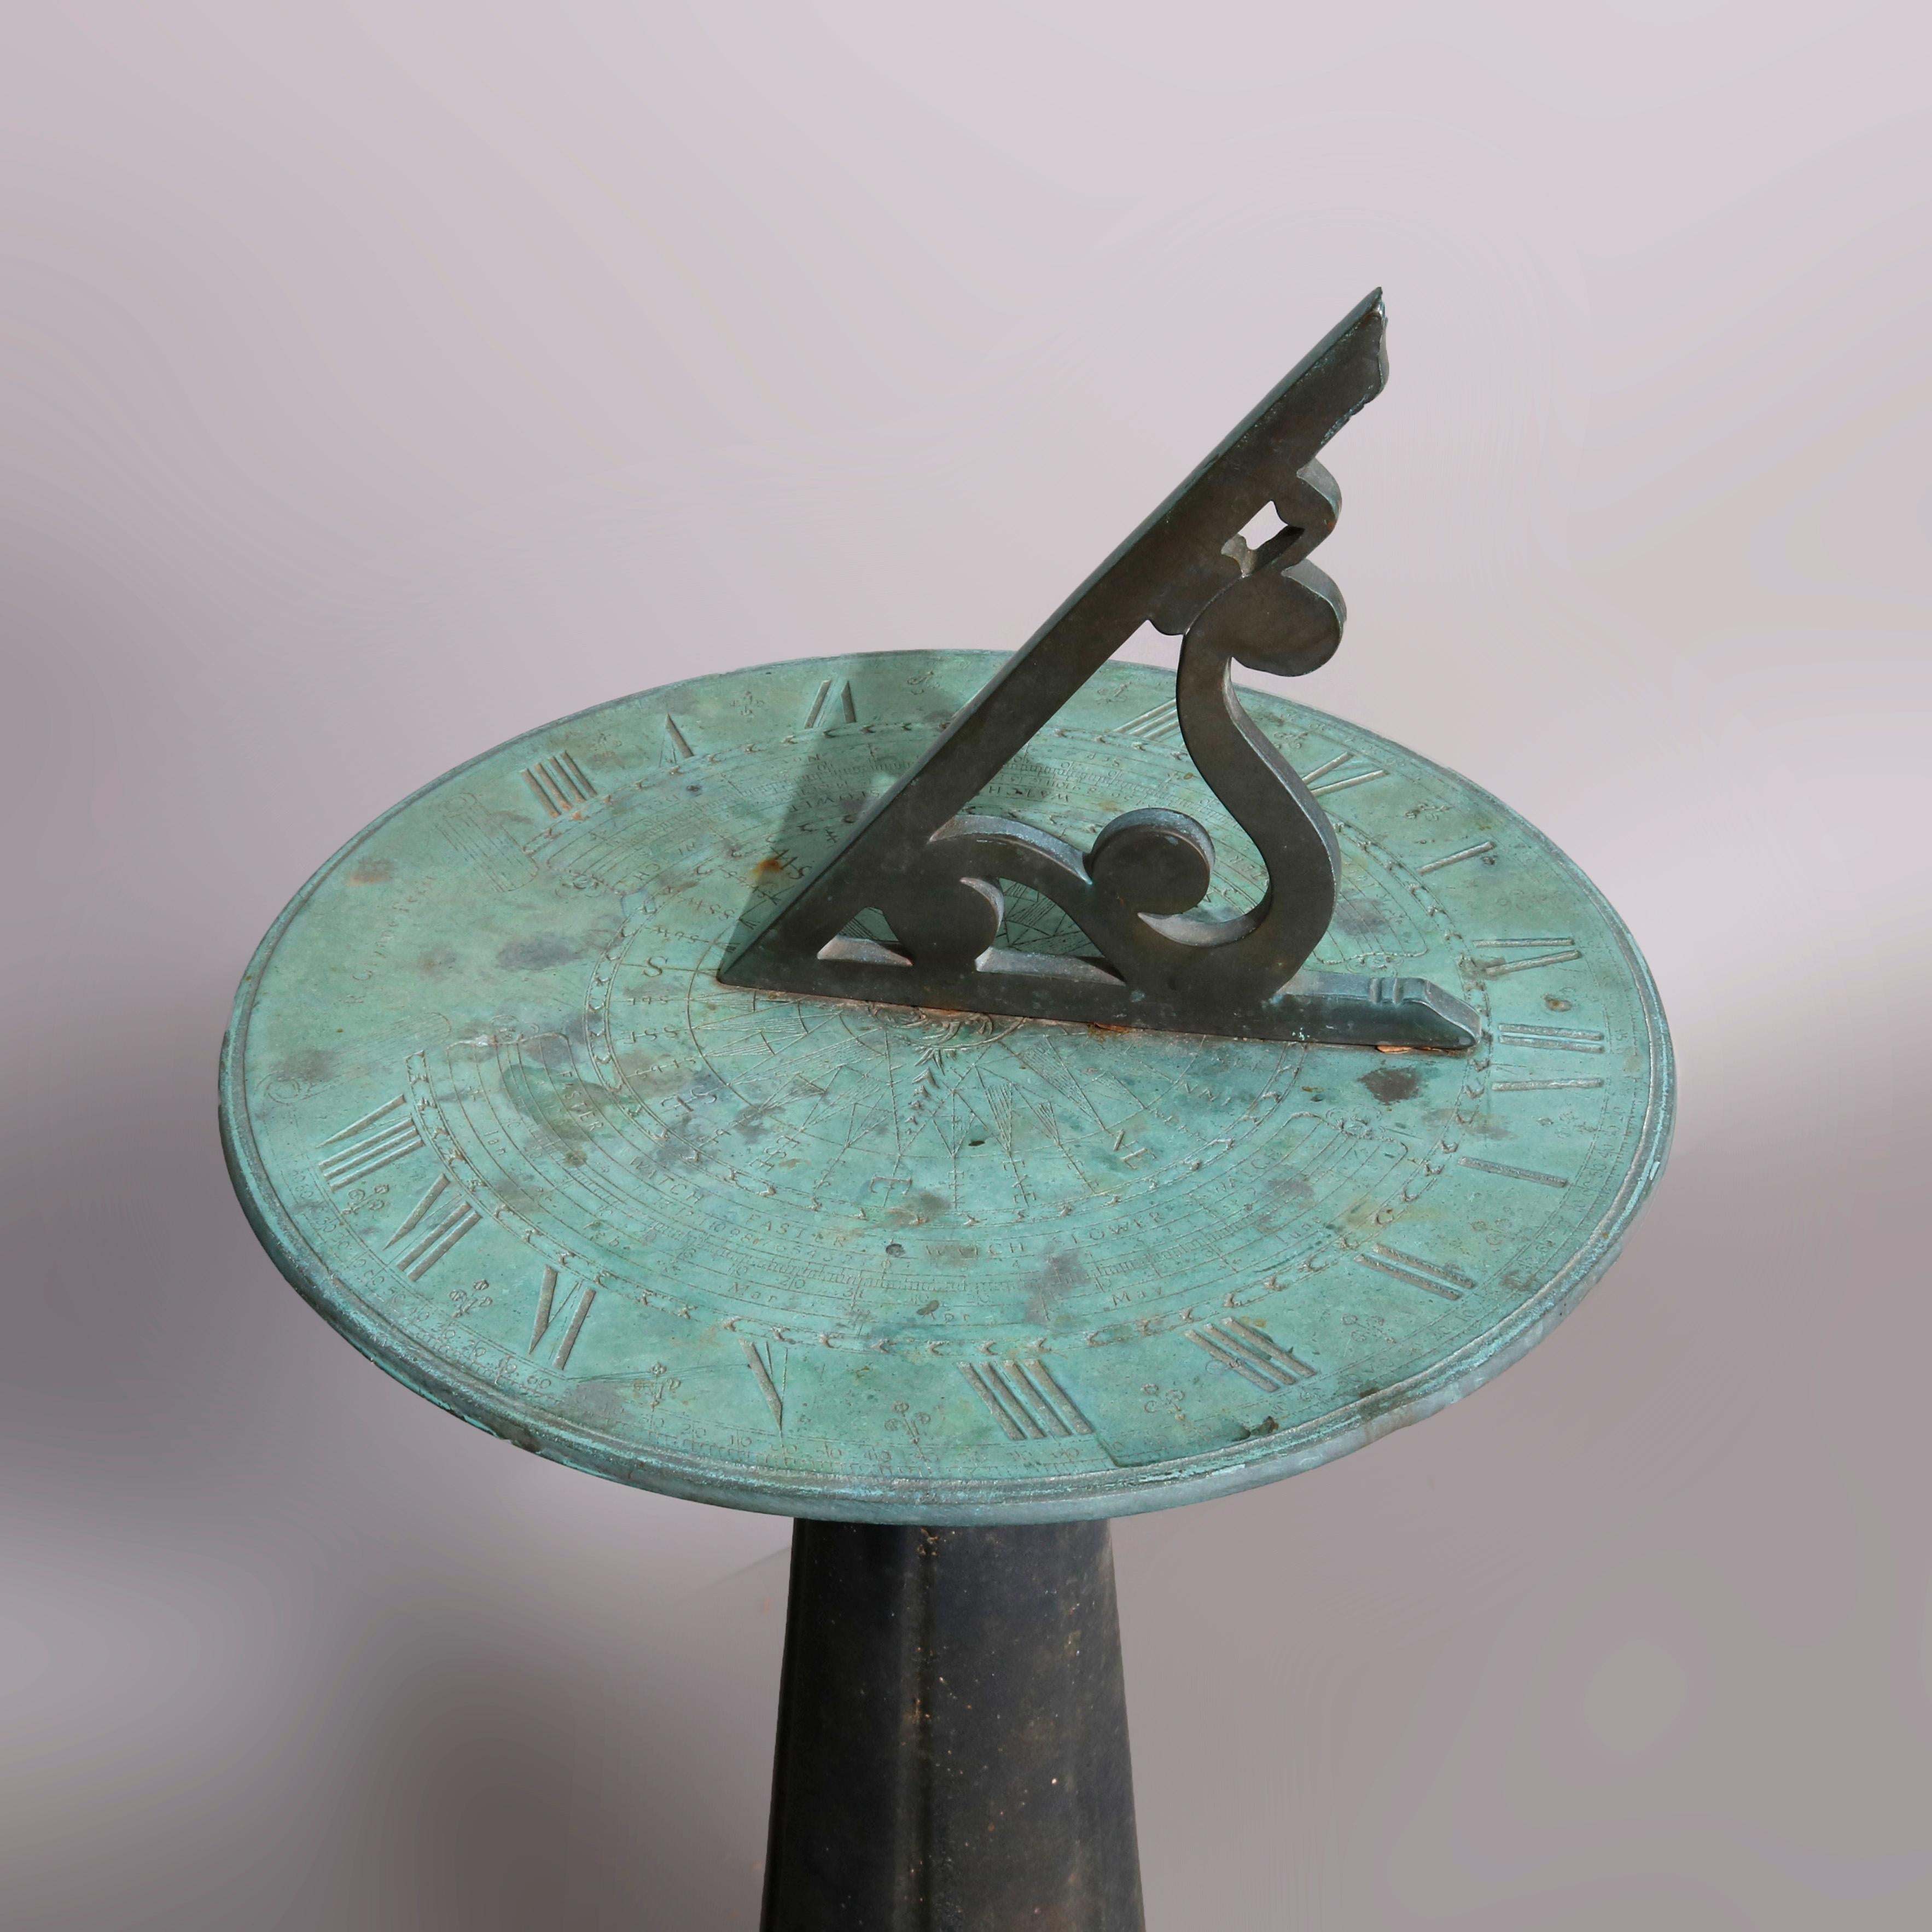 An antique English garden sun dial signed Richard Glynne offers bronze dial surmounting flared and fluted column base, signed Richard Glynne Fecit as photographed, circa 1920.

Measures: 31.5